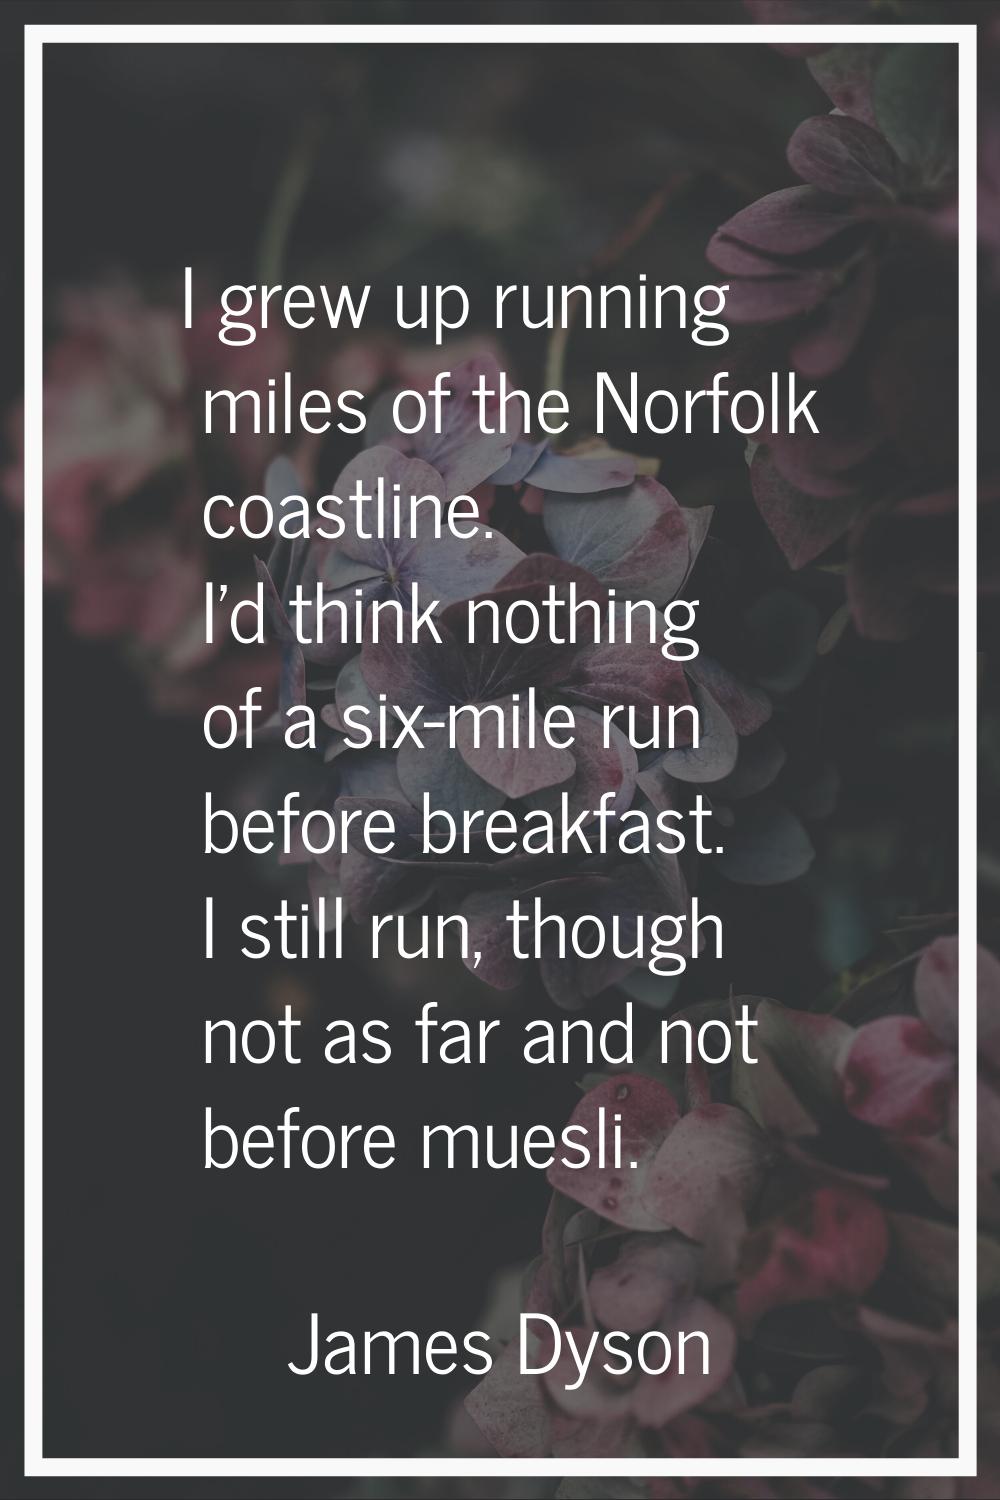 I grew up running miles of the Norfolk coastline. I'd think nothing of a six-mile run before breakf